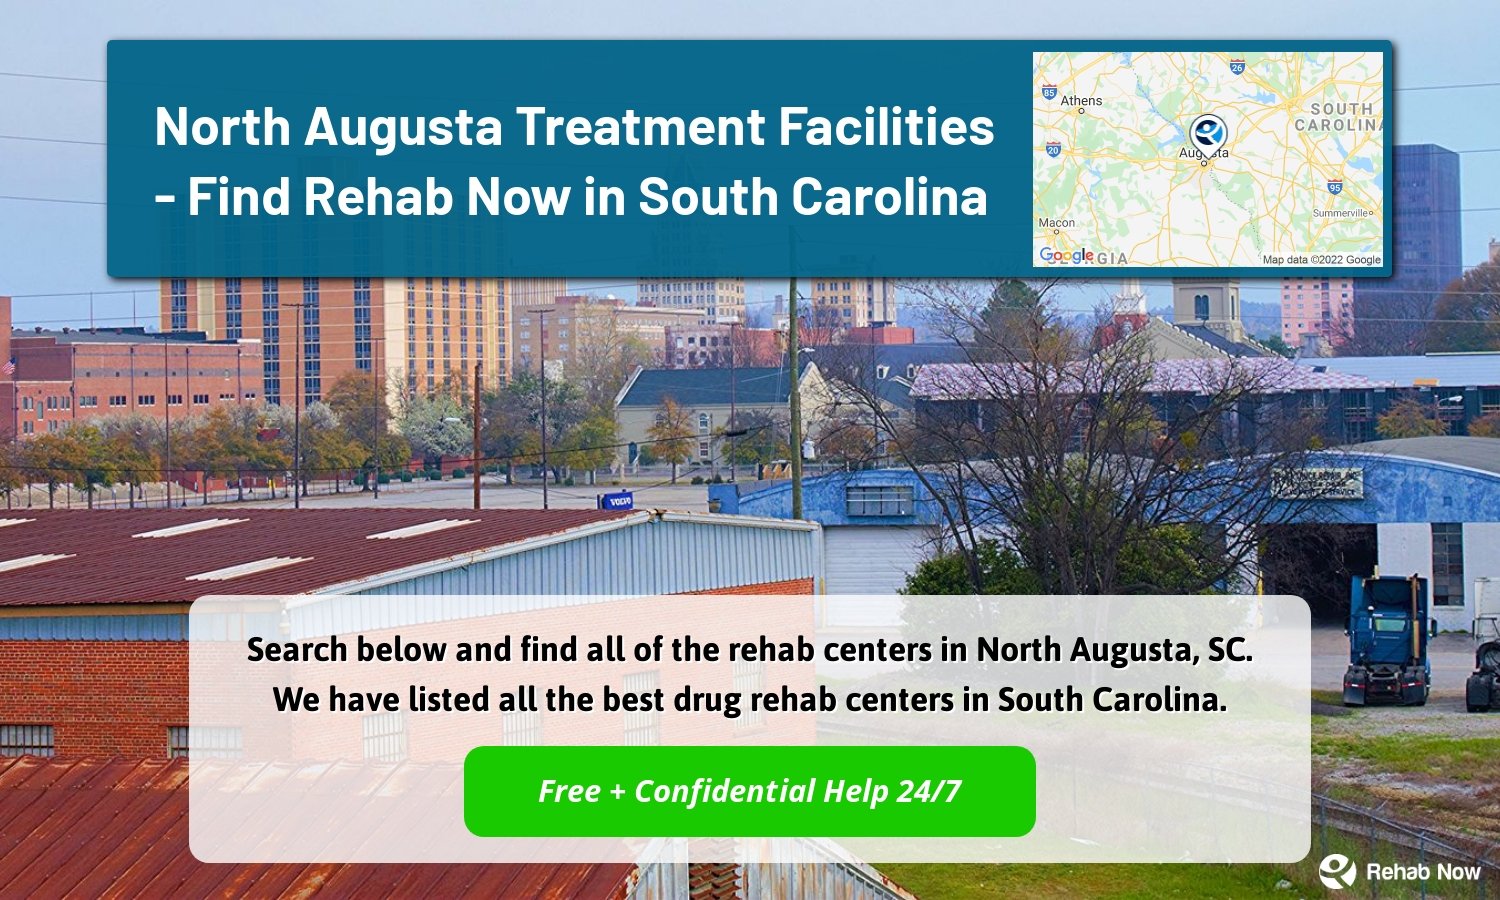 Search below and find all of the rehab centers in North Augusta, SC. We have listed all the best drug rehab centers in South Carolina.